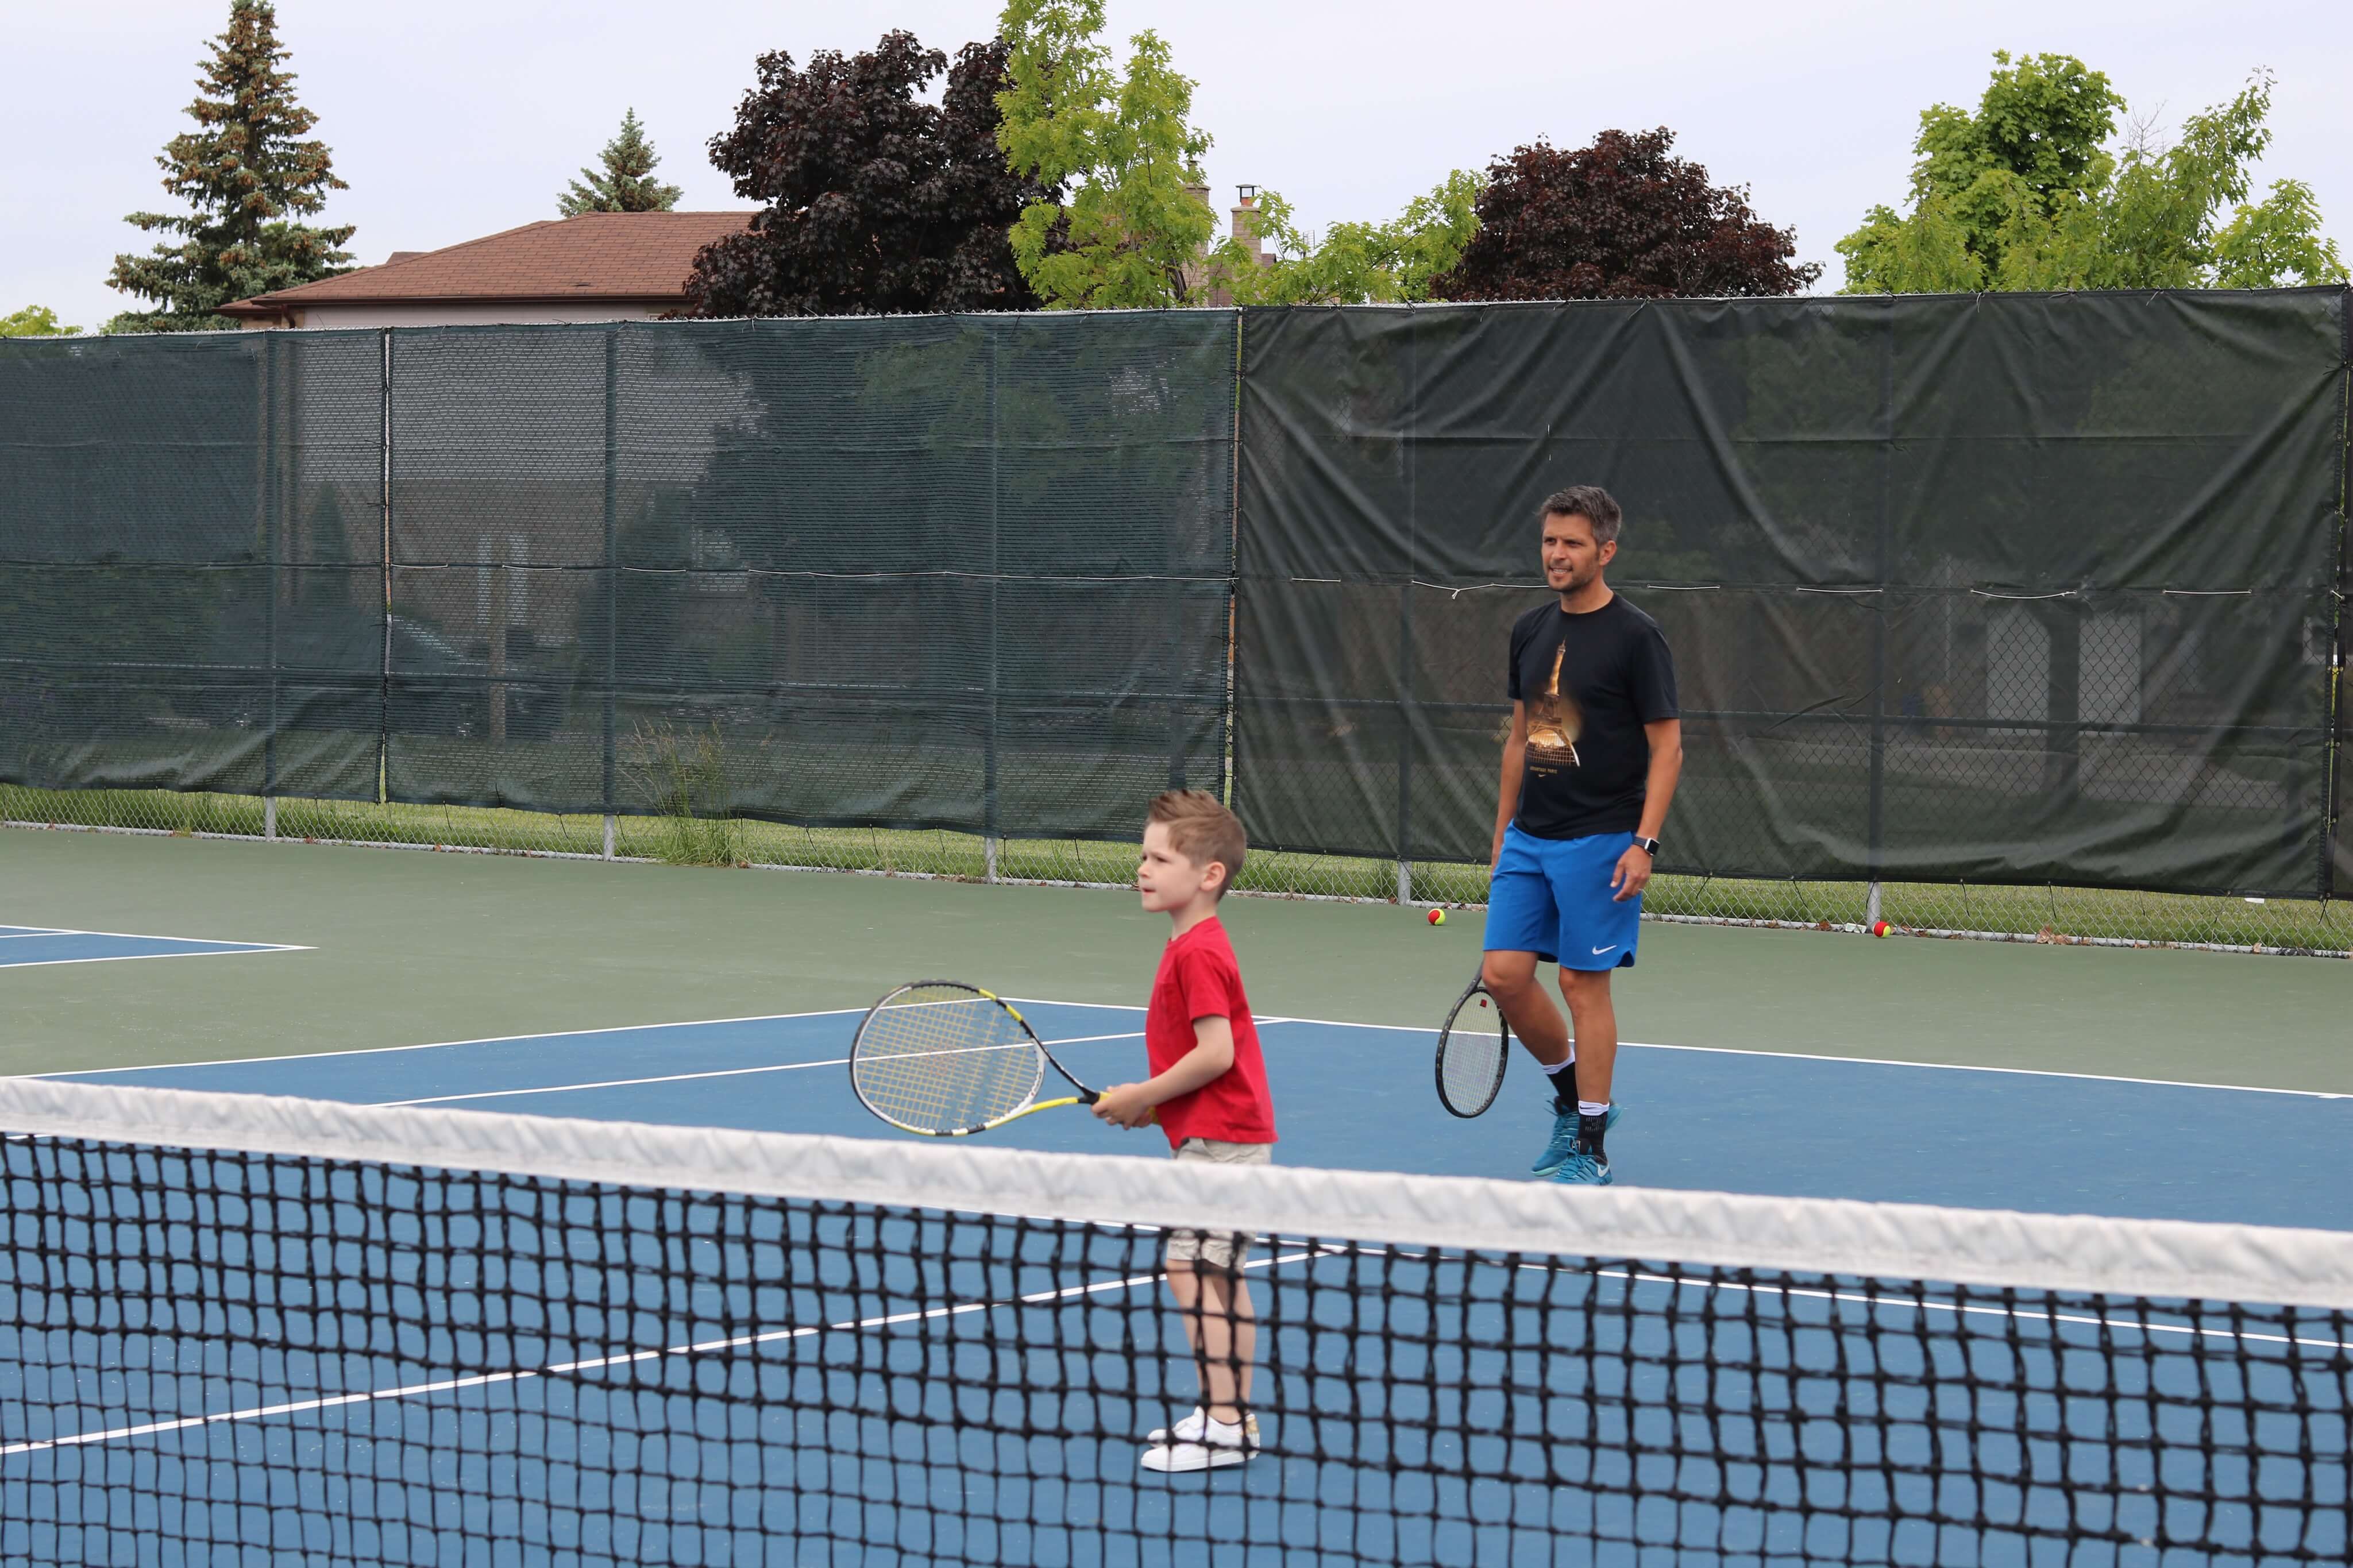 Spending the Summer with Nike Tennis Camps; Durham Region Kids camps for tennis